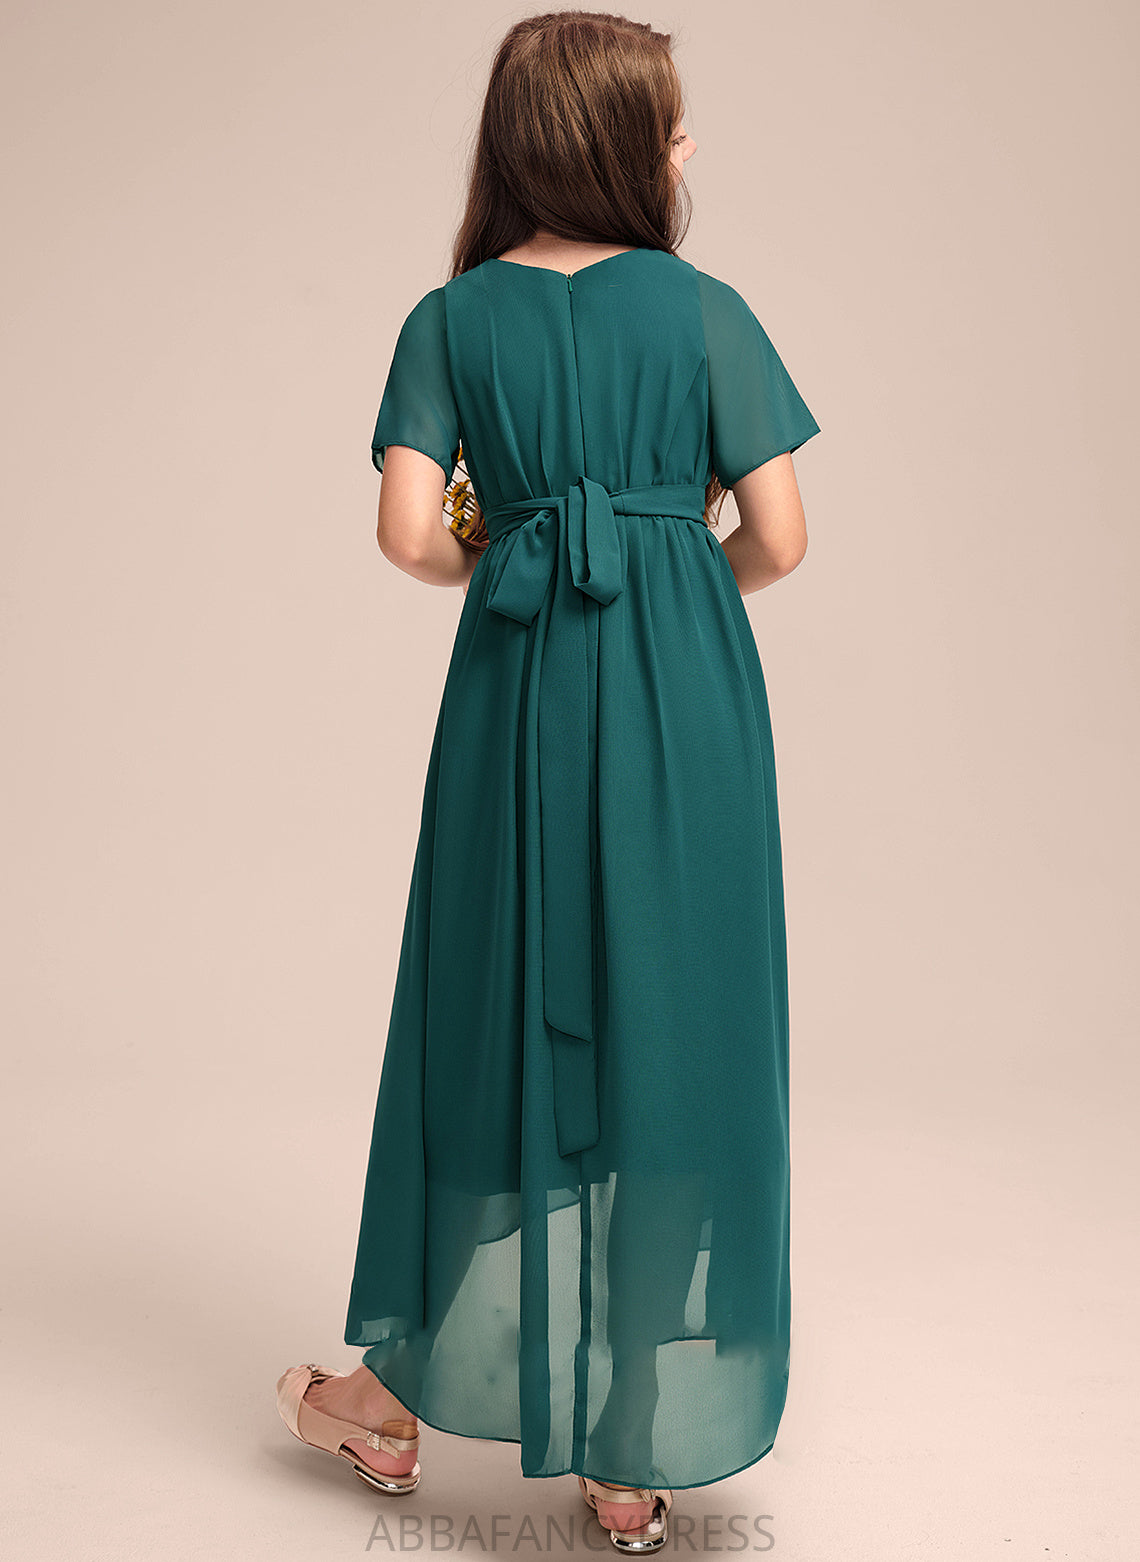 Bow(s) Ruffle Chiffon A-Line With Asymmetrical Junior Bridesmaid Dresses Neck Scoop Angie